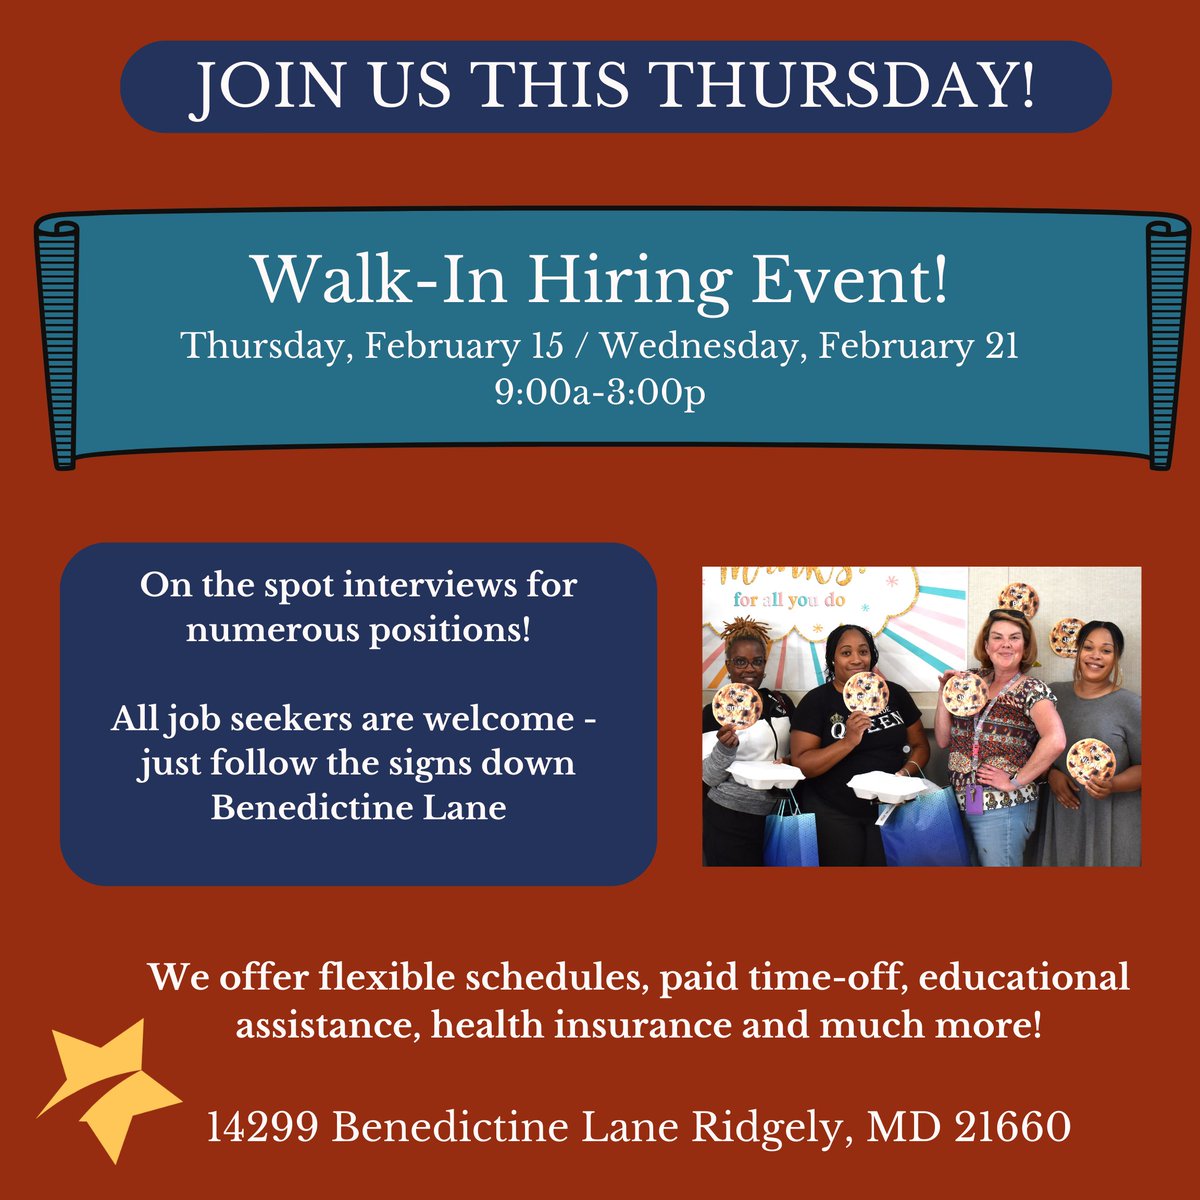 THIS THURSDAY! No appointment necessary. Learn more about Benedictine benschool.org #mdhiring #mdjobs #easternshoremd #developmentallydisabled #autism #bensupports